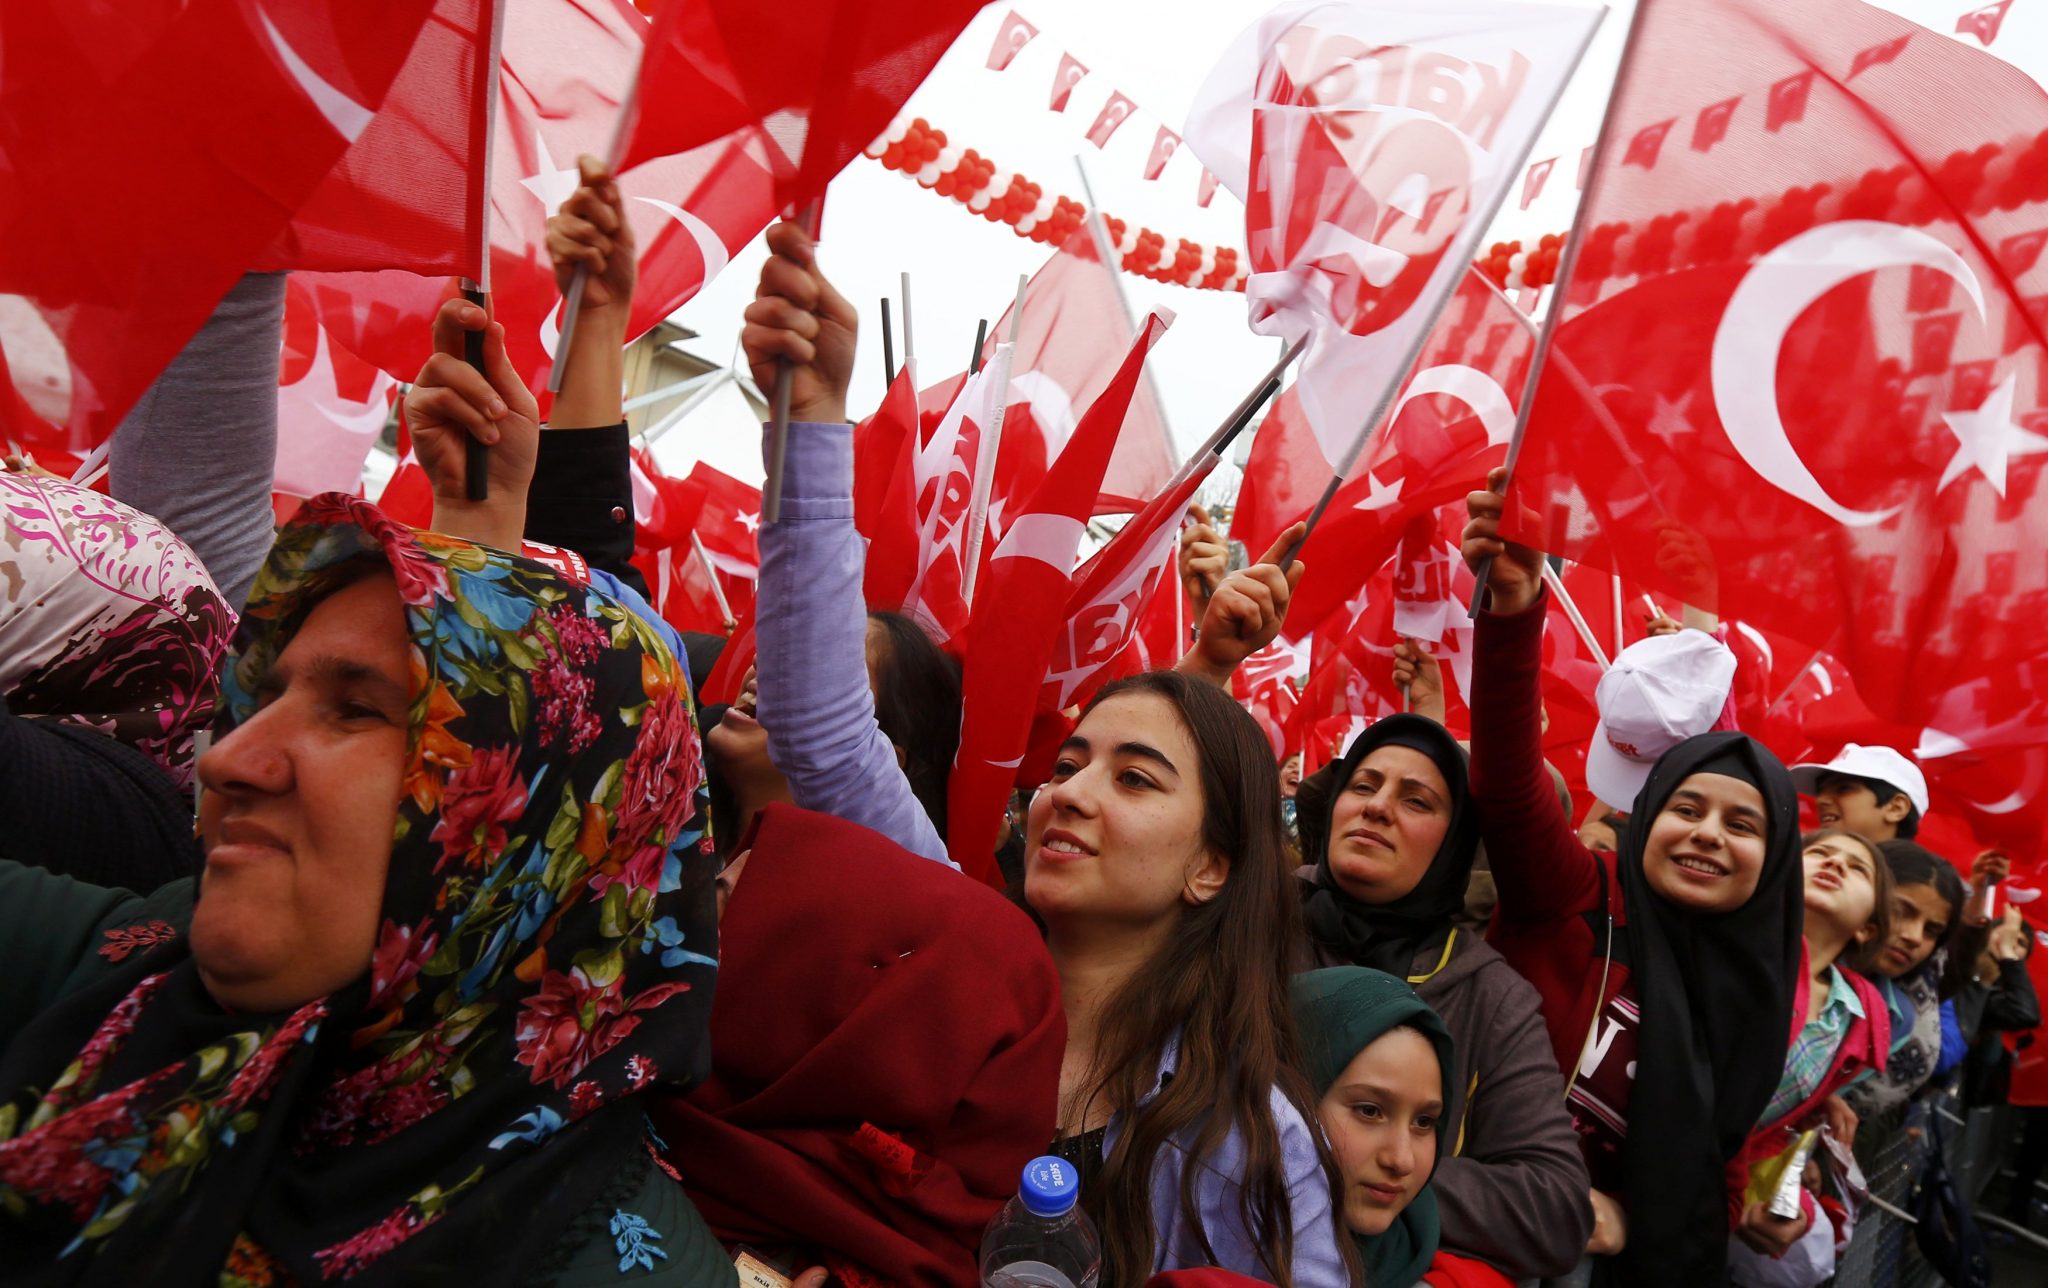 Supporters of Turkish President Tayyip Erdogan wave Turkey's national flags as they wait for the start of a rally for the upcoming referendum in the Kurdish-dominated southeastern city of Diyarbakir, Turkey, April 1, 2017. REUTERS/Murad Sezer